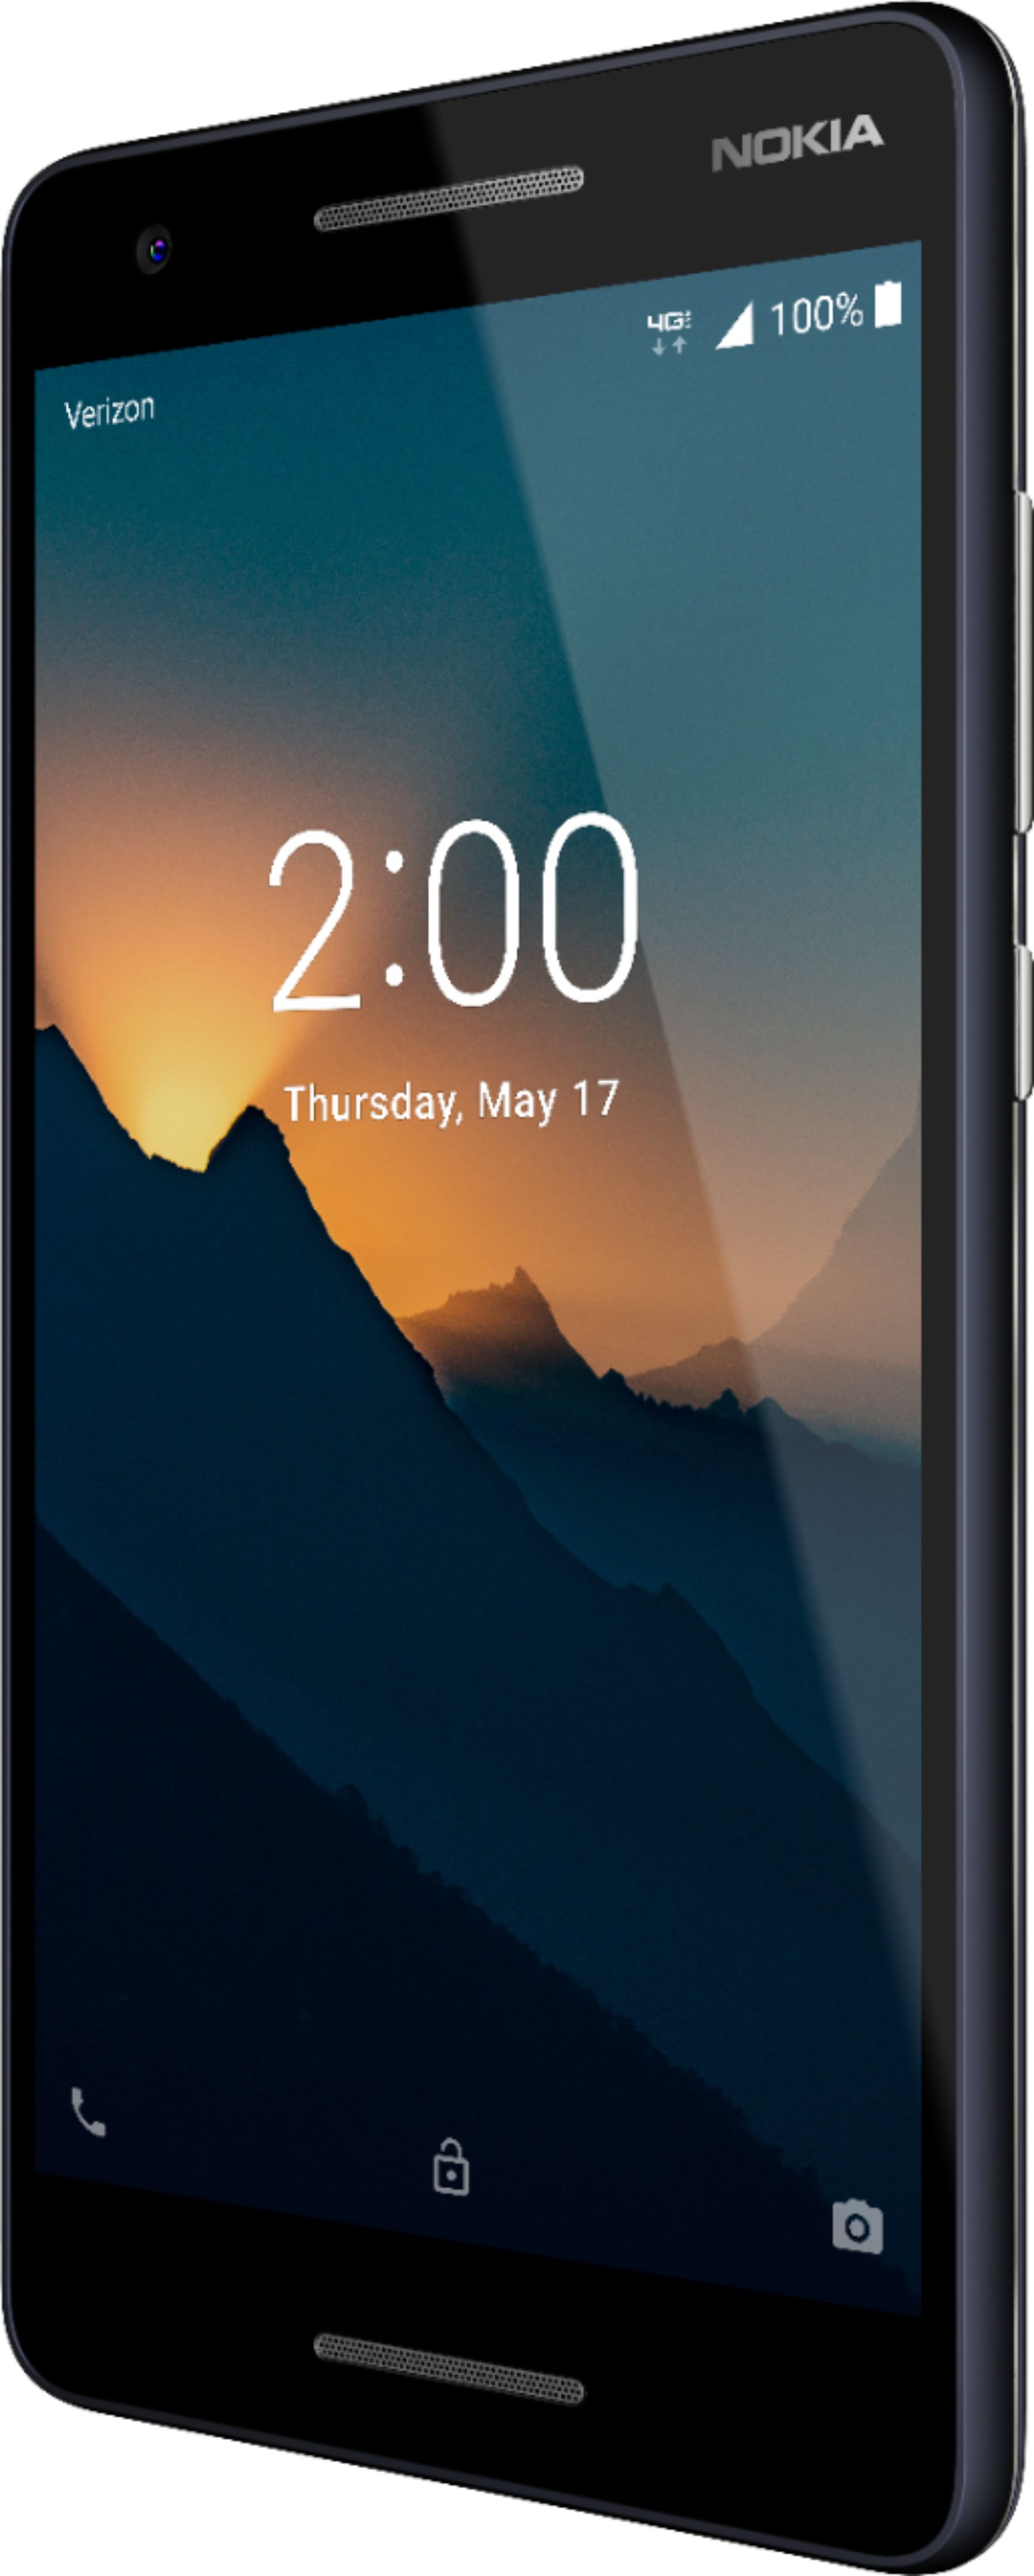 Left View: Save $10 on Nokia 2V with Verizon $50 Airtime Card (Walmart.com Exclusive Offer)